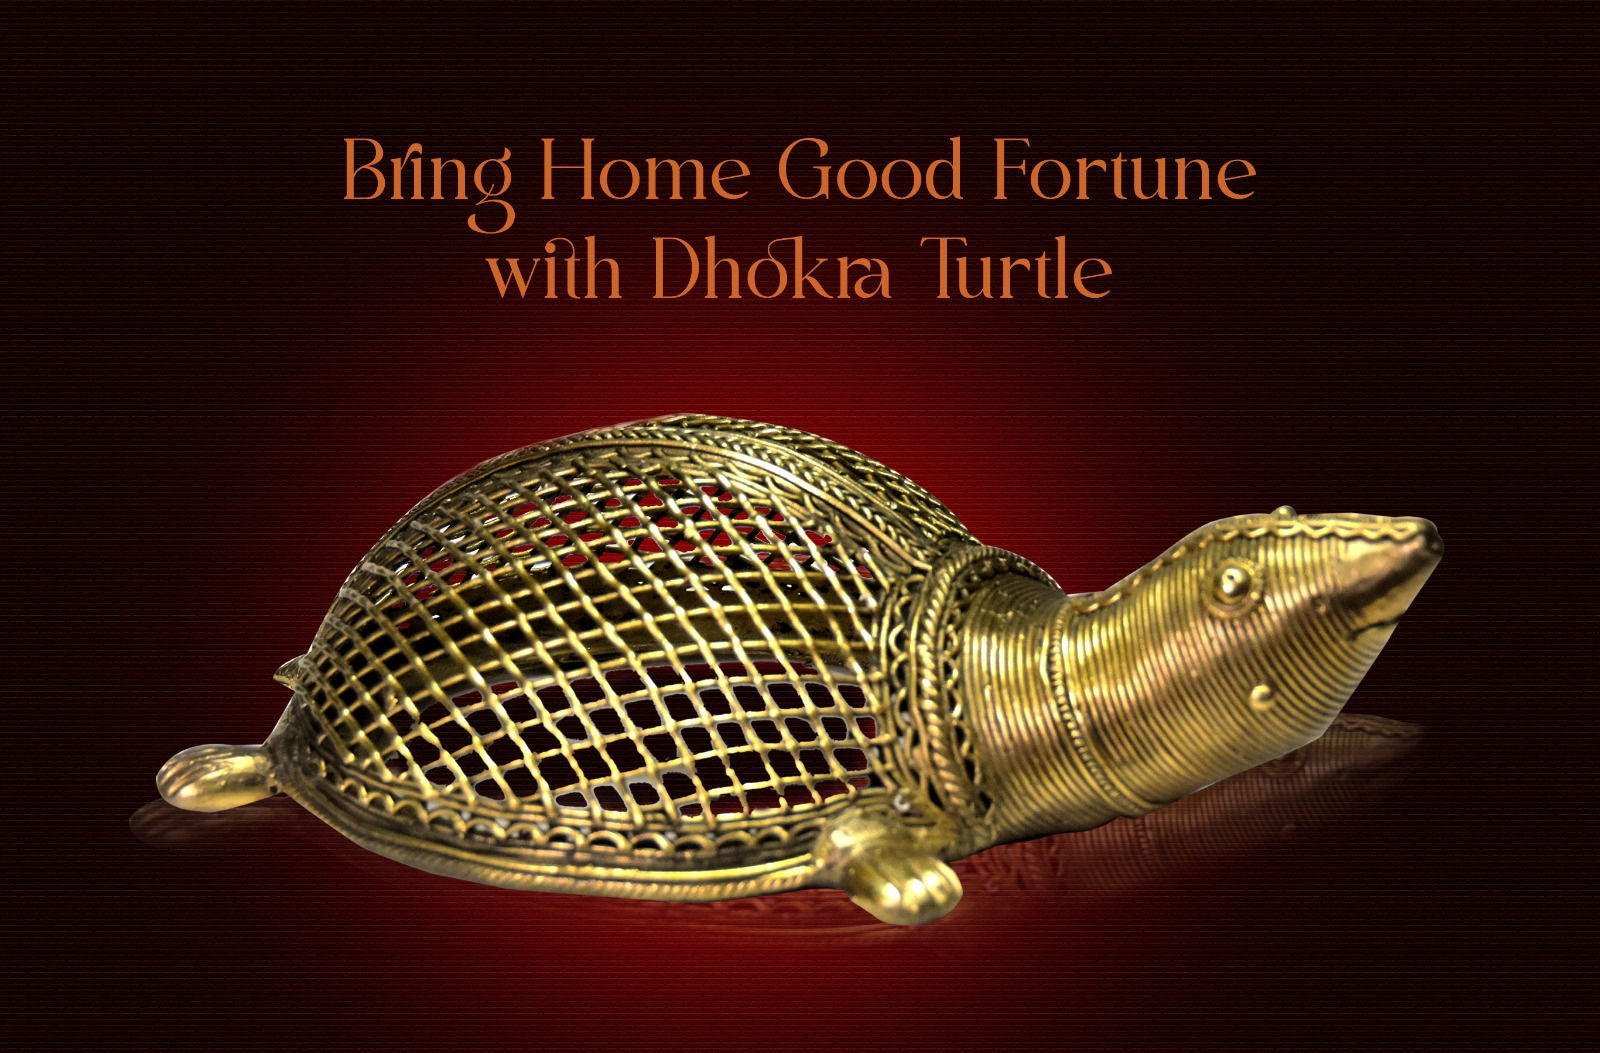 Bring Home Good Fortune with Dhokra Turtle